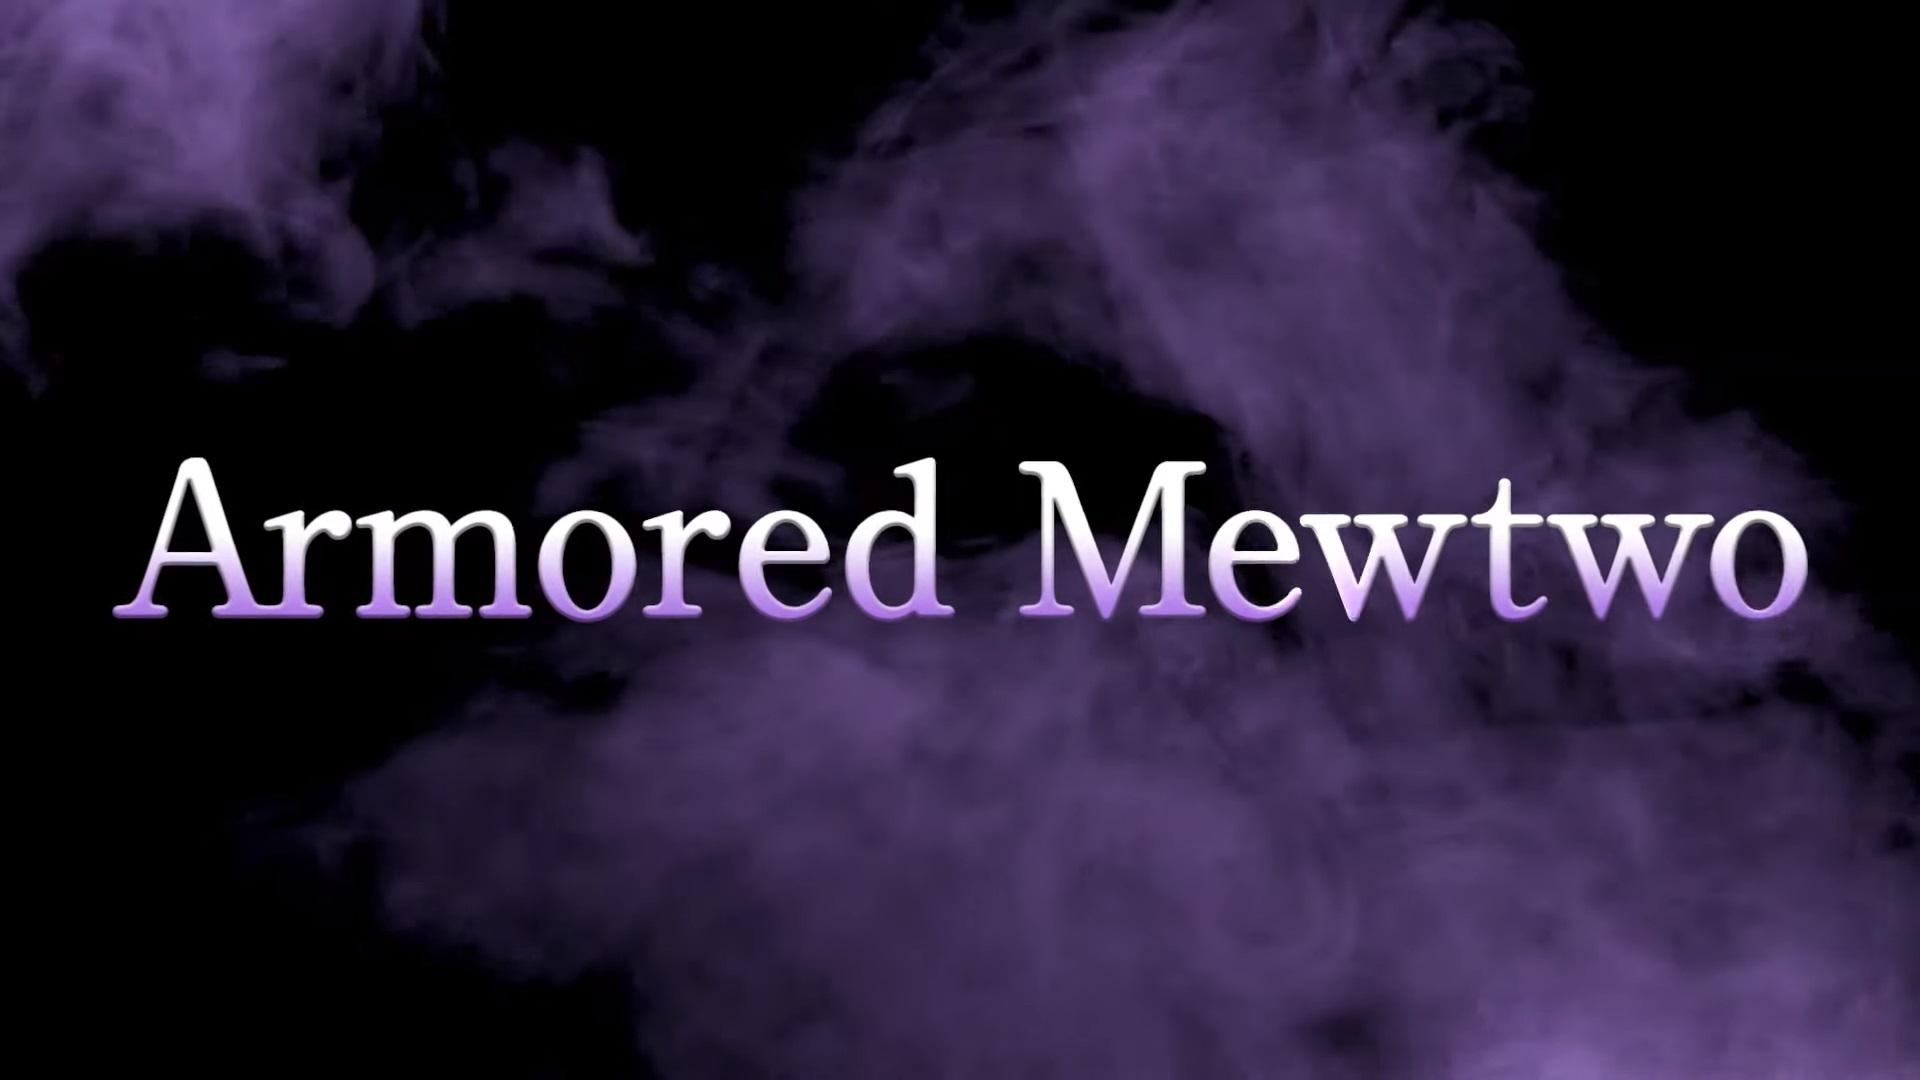 Armored Mewtow Comes to Pokemon Go for a Limited Time on July 10